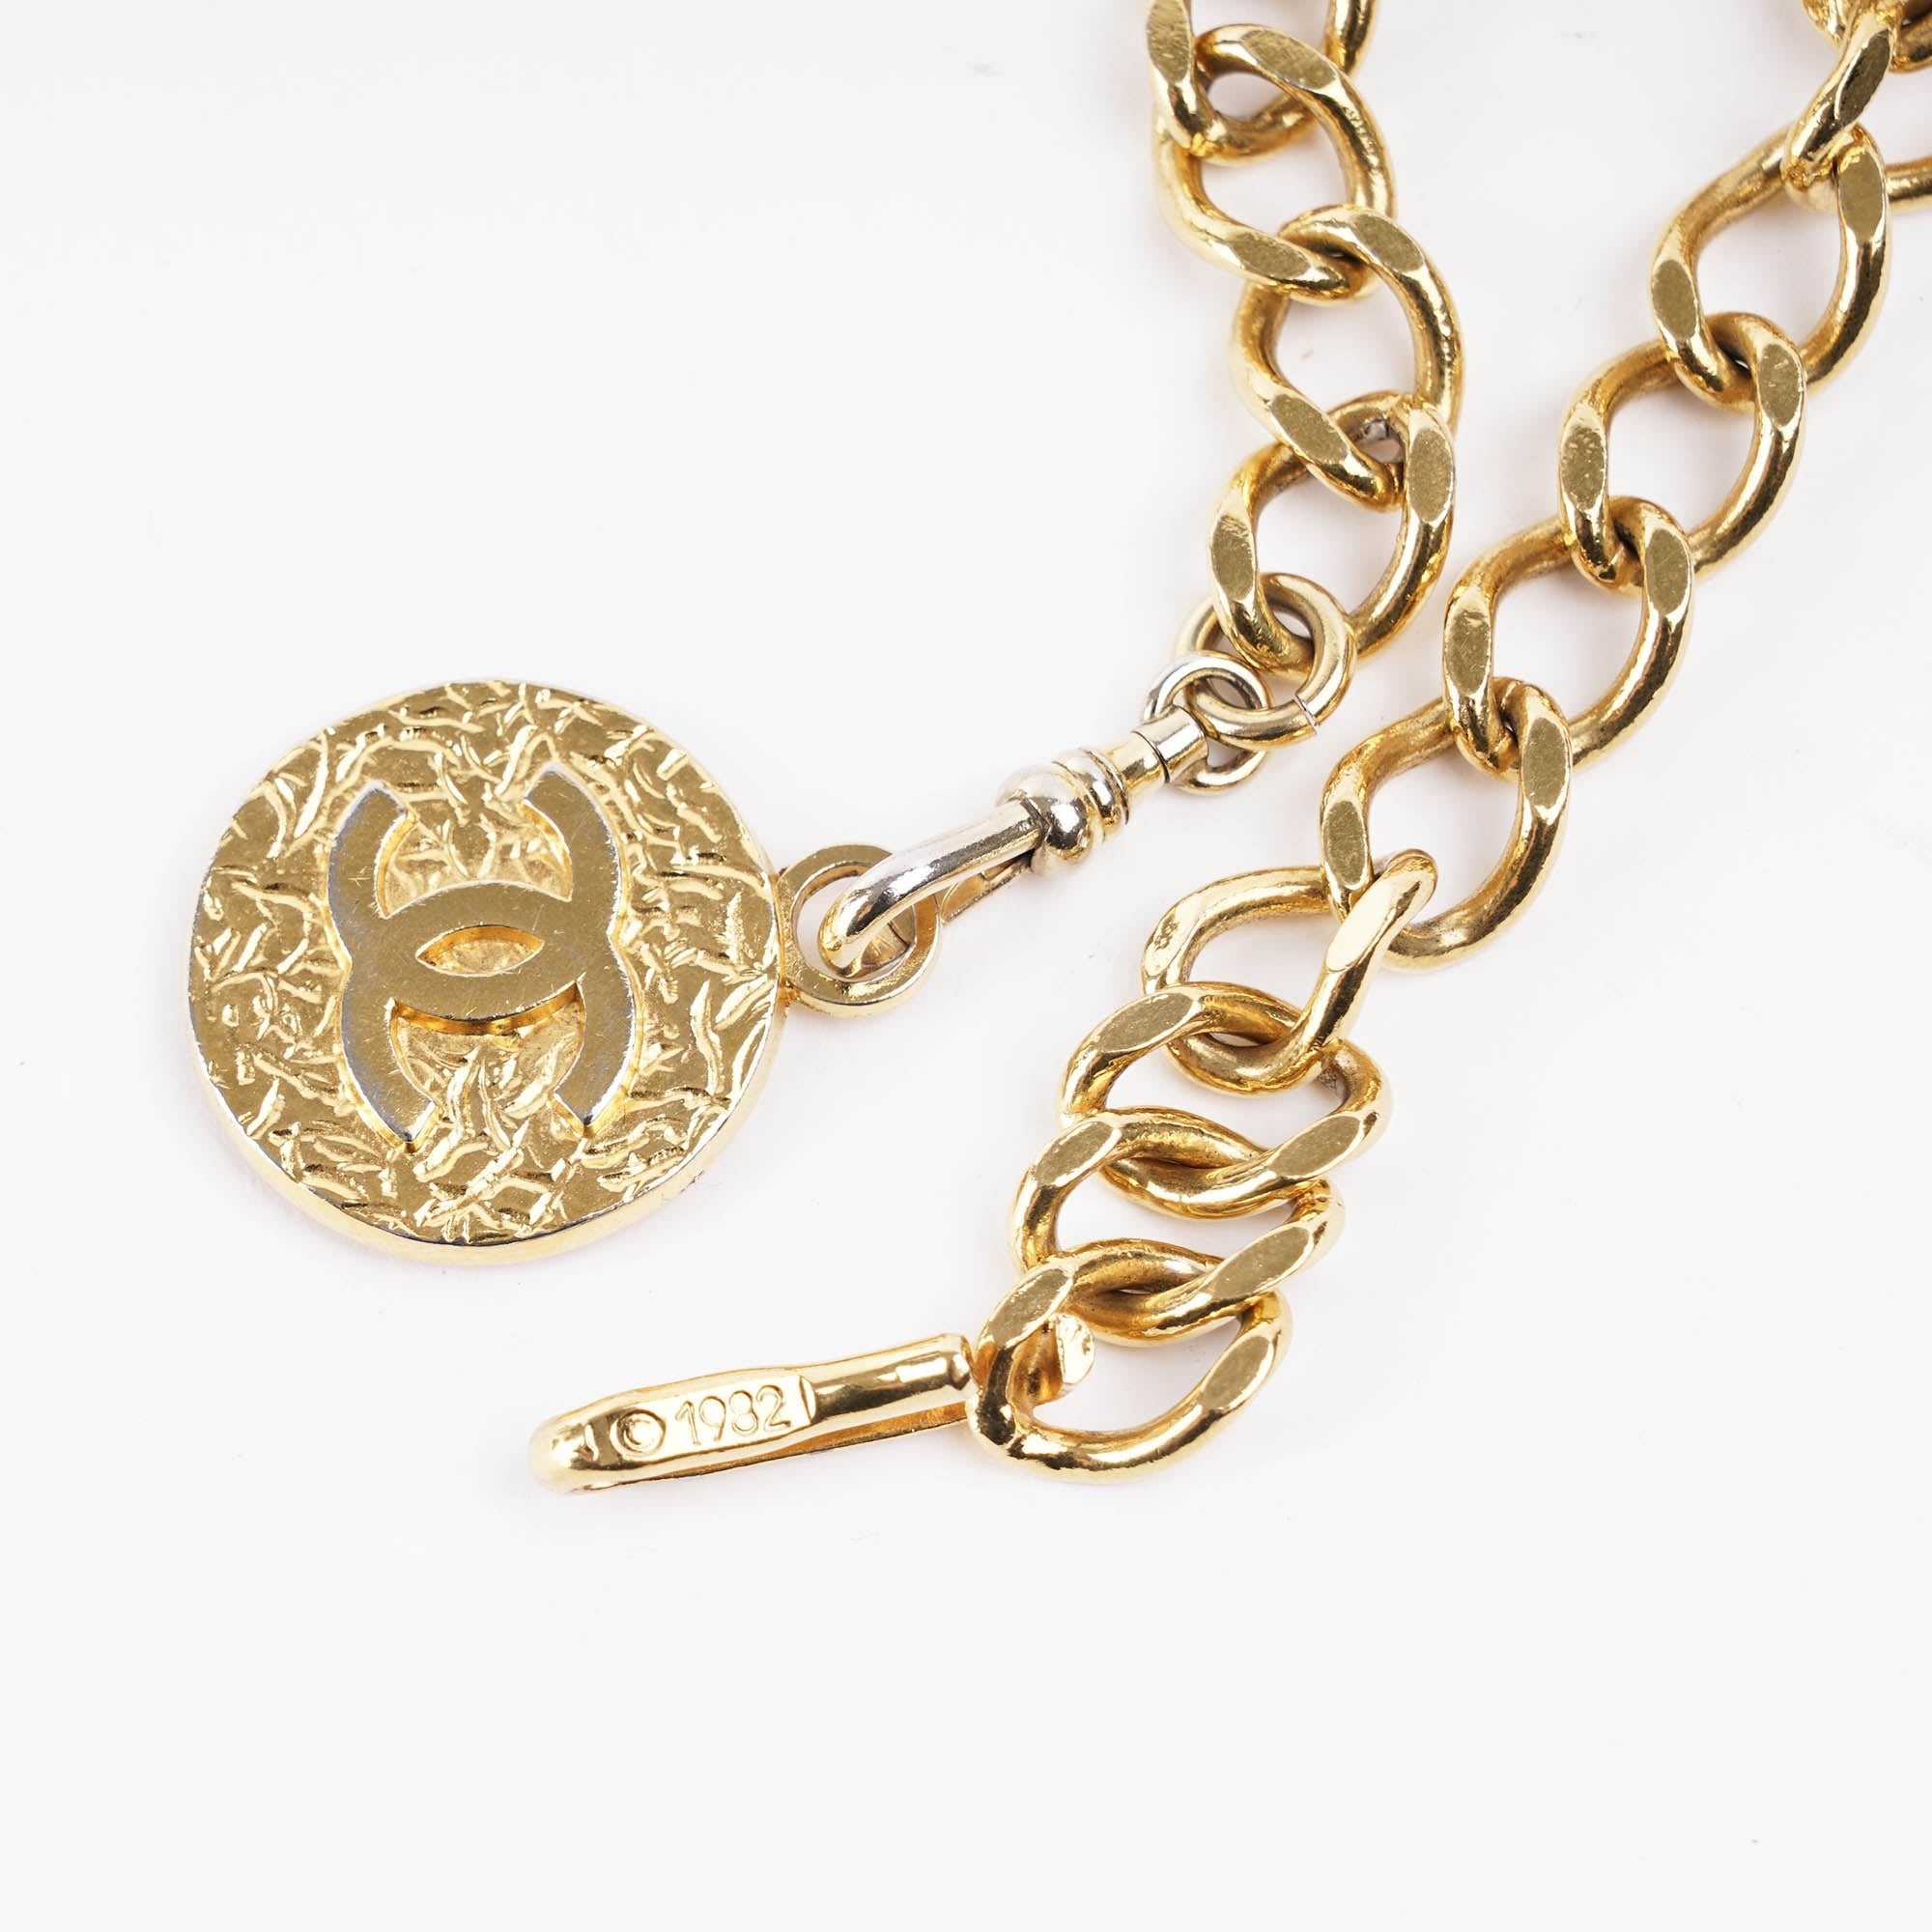 Vintage 24K Gold-plated Chain Belt - CHANEL - Affordable Luxury image